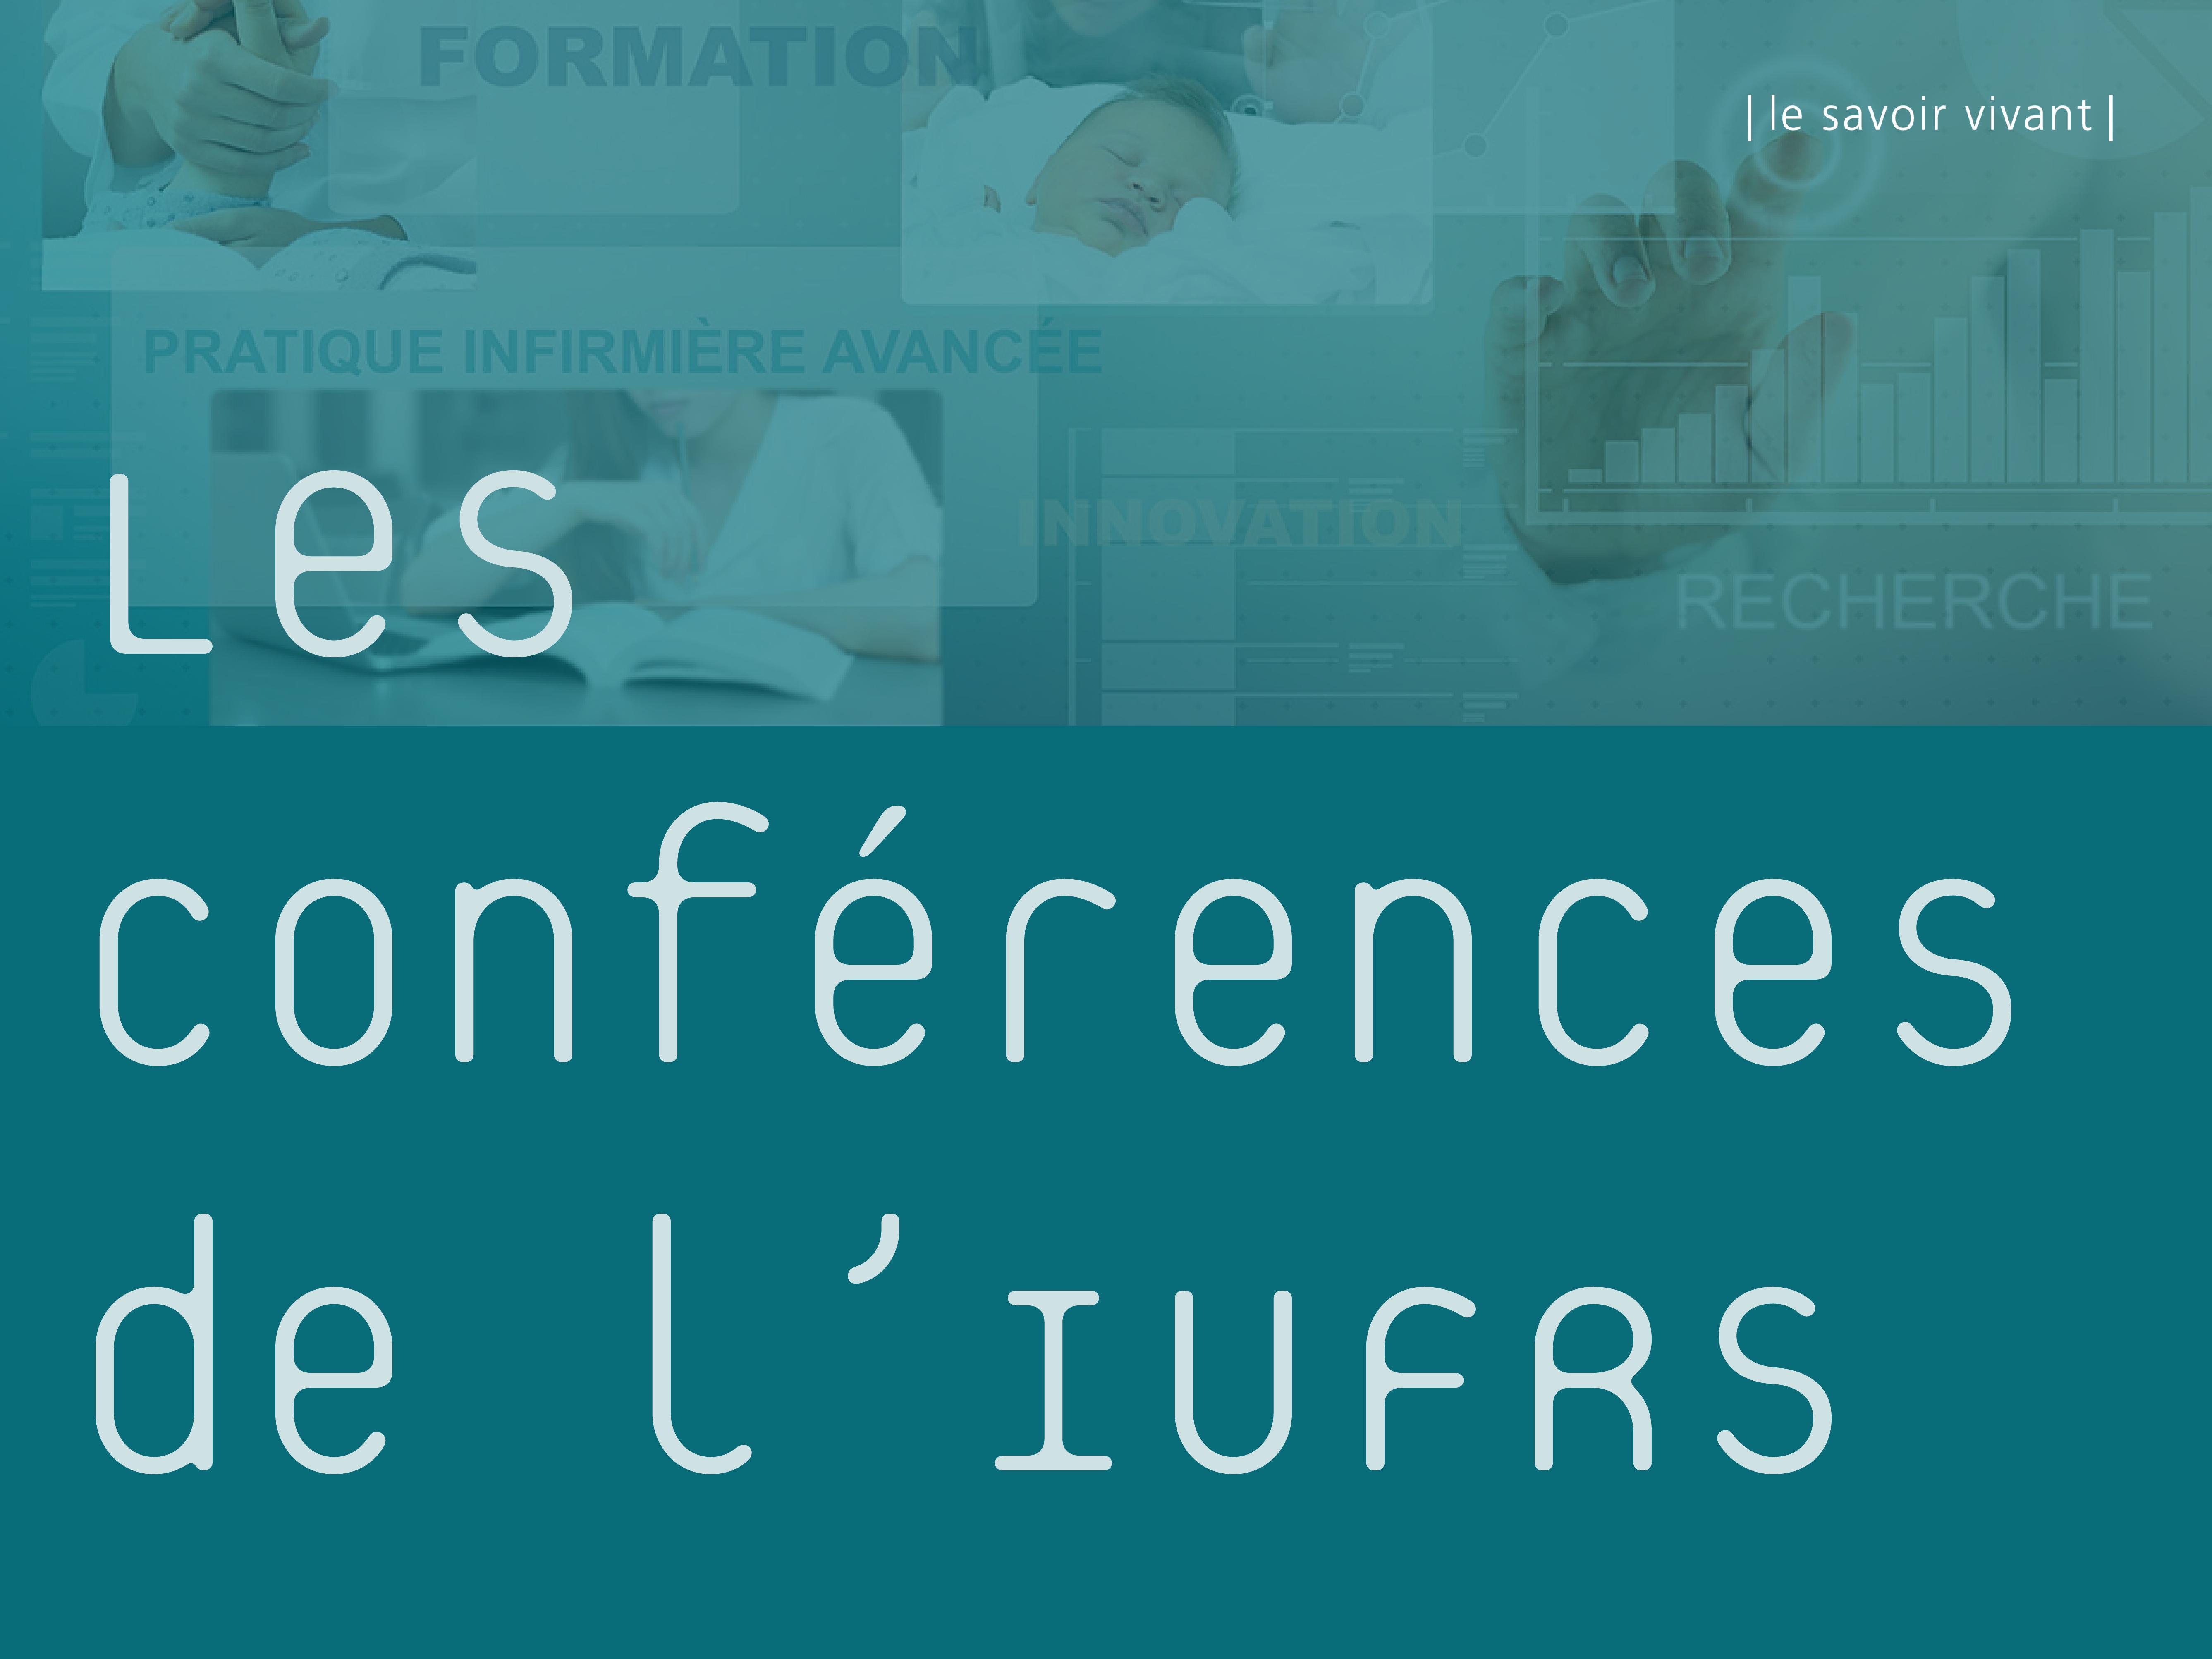 Conférence de l'IUFRS  - Panel discussion: "Symptom science state-of-the-art"